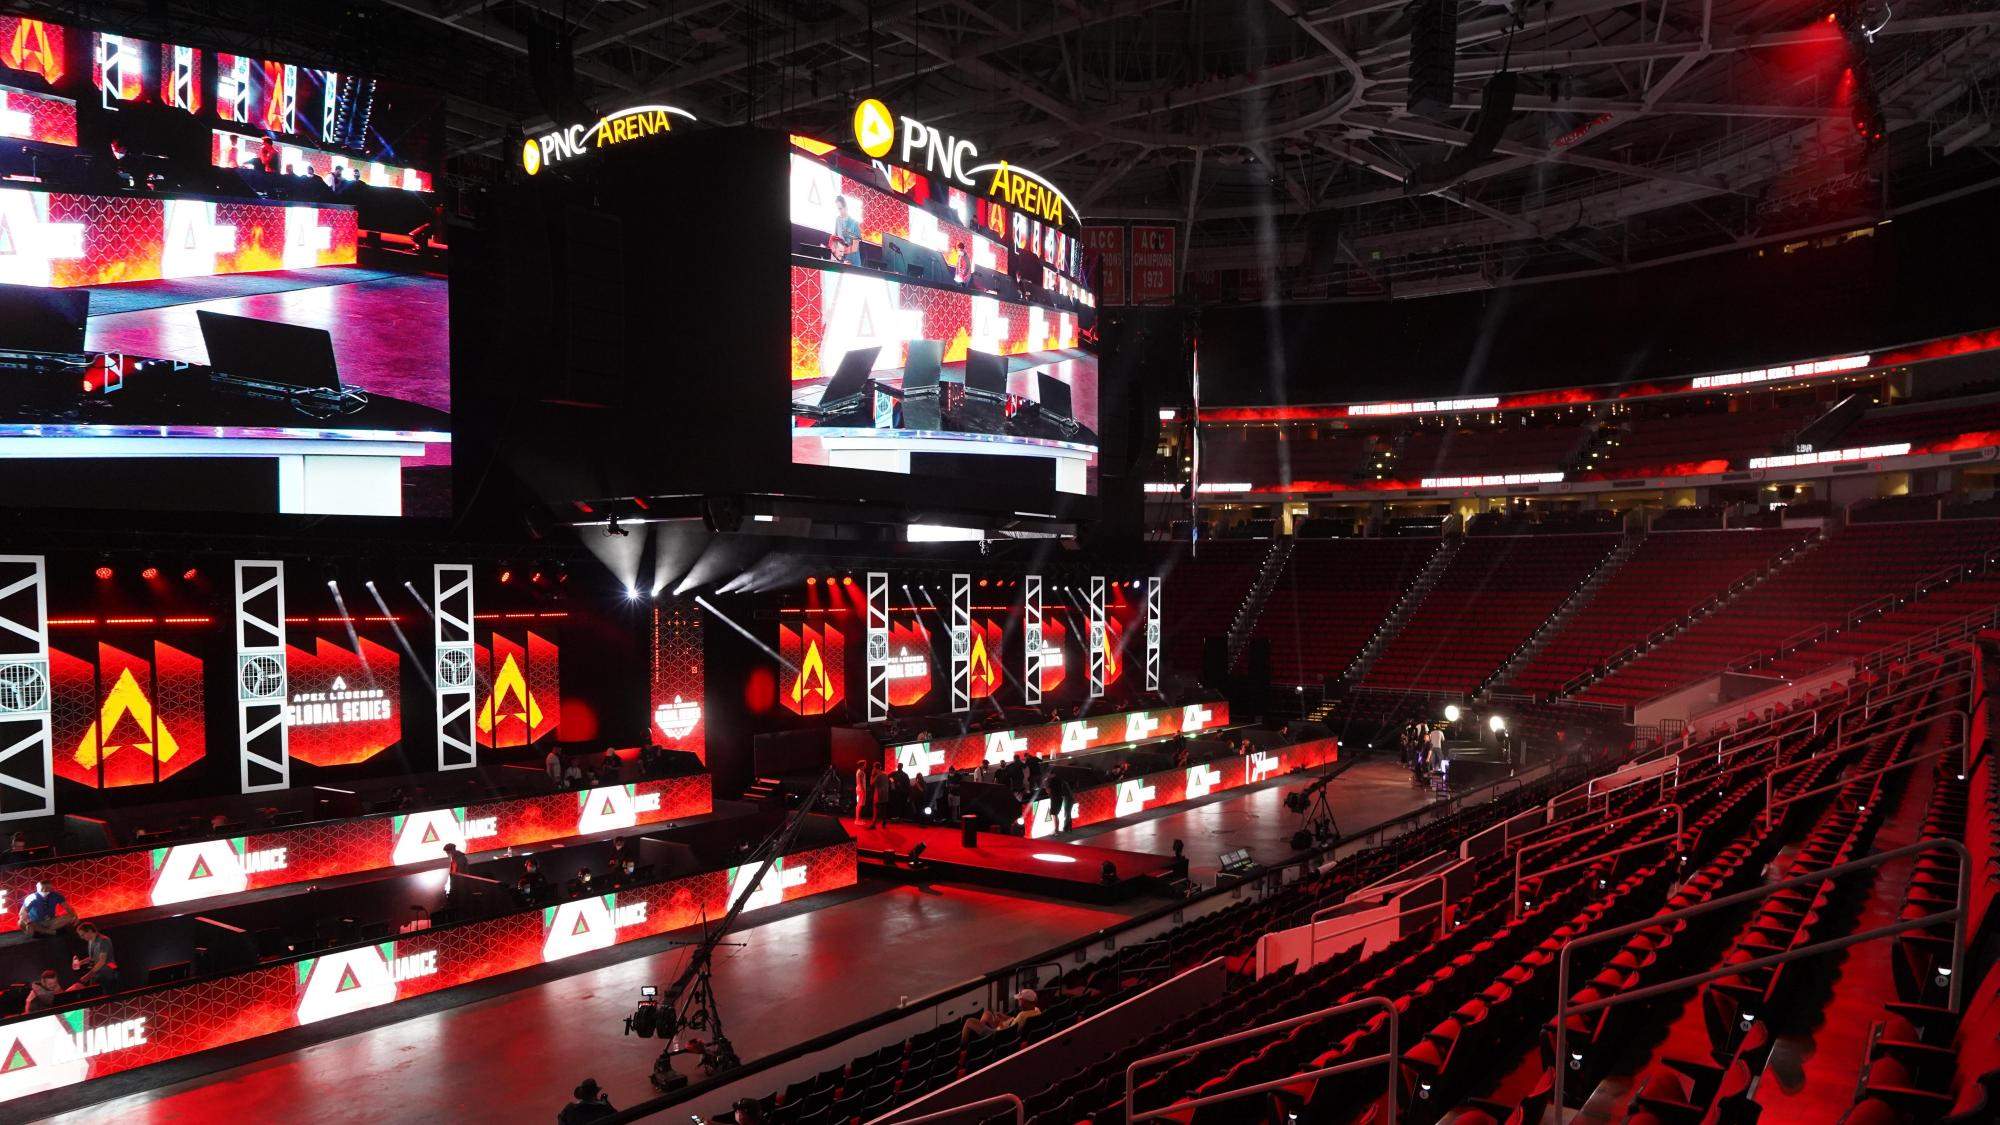 8 Captivating Facts About PNC Arena - Facts.net